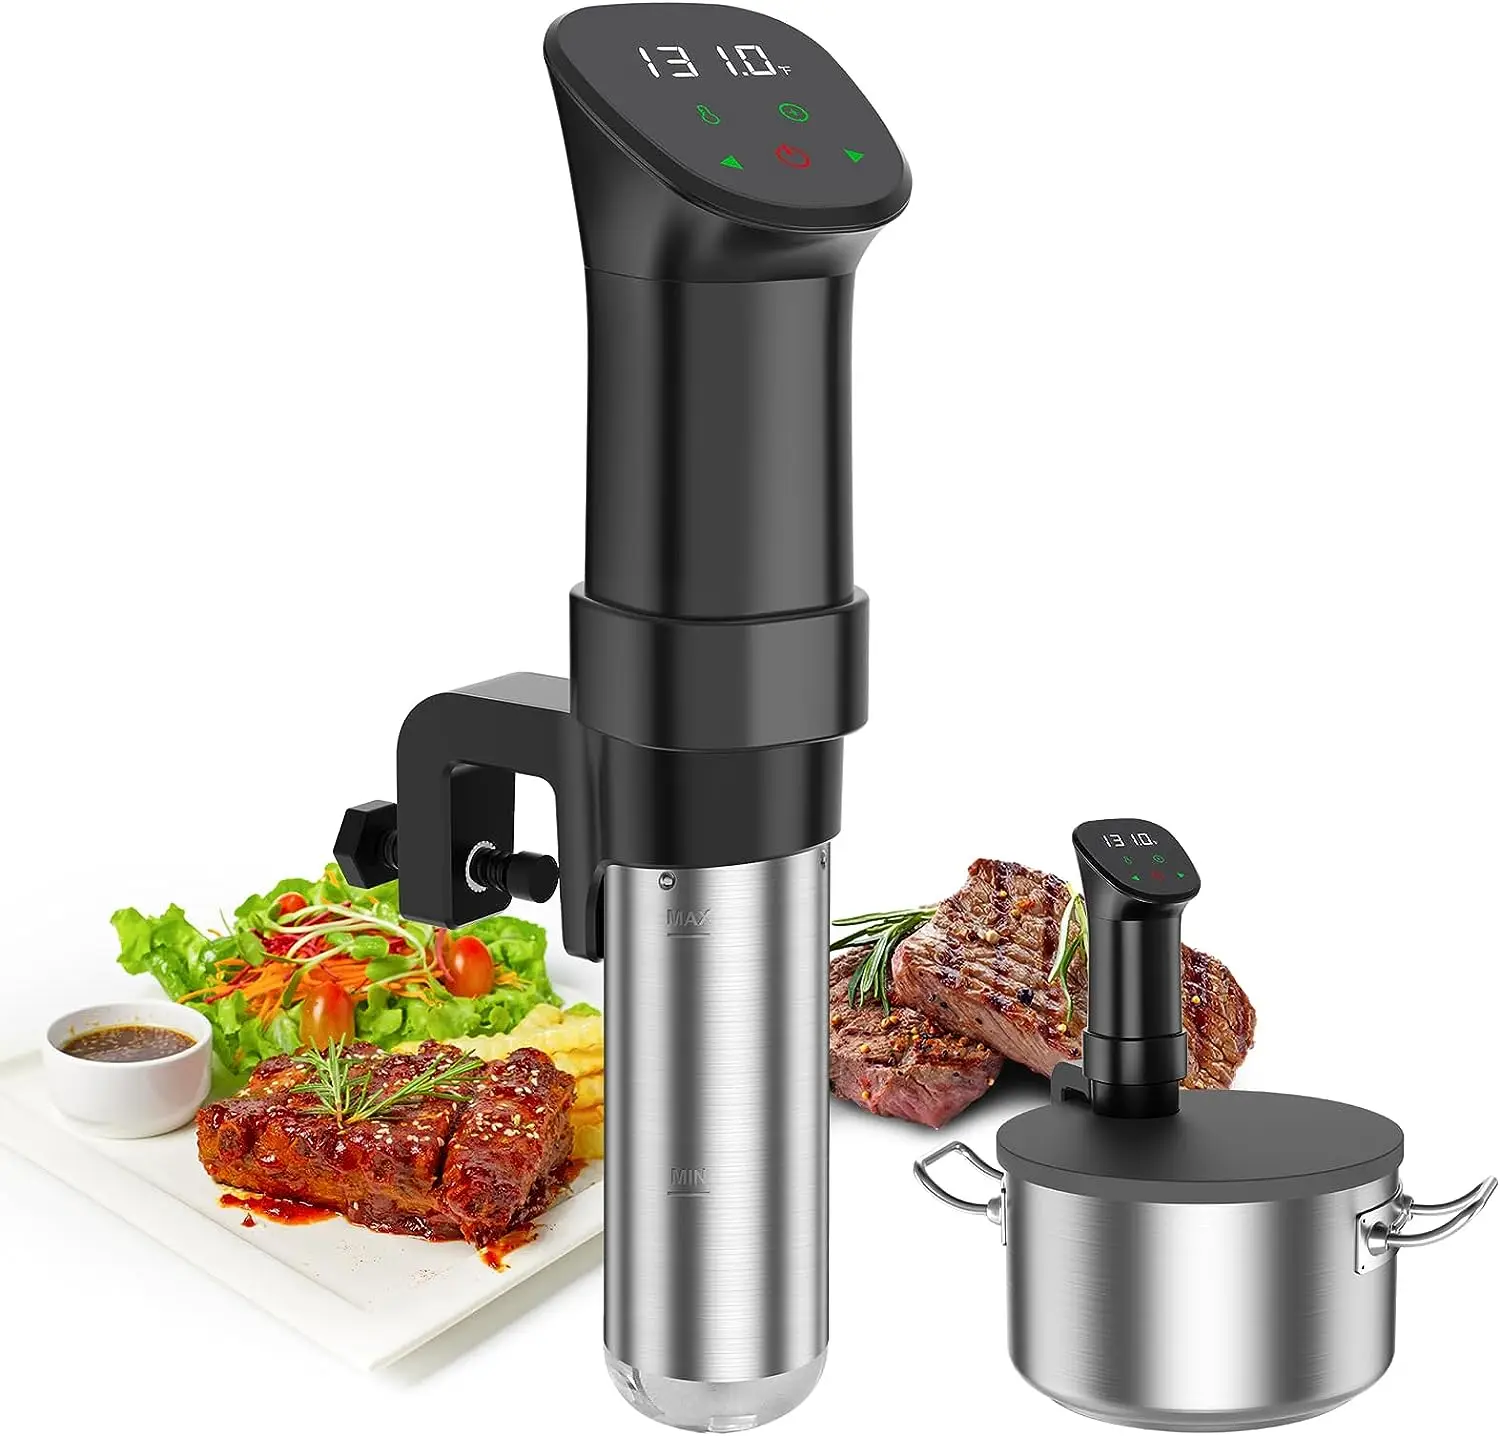 

Vide Machine-Suvee Cooker-Rocyis Sous Vide Kit with Lid, Recipes-1000W Fast Heating/Thermal Immersion Circulator/ Accurate Tempe